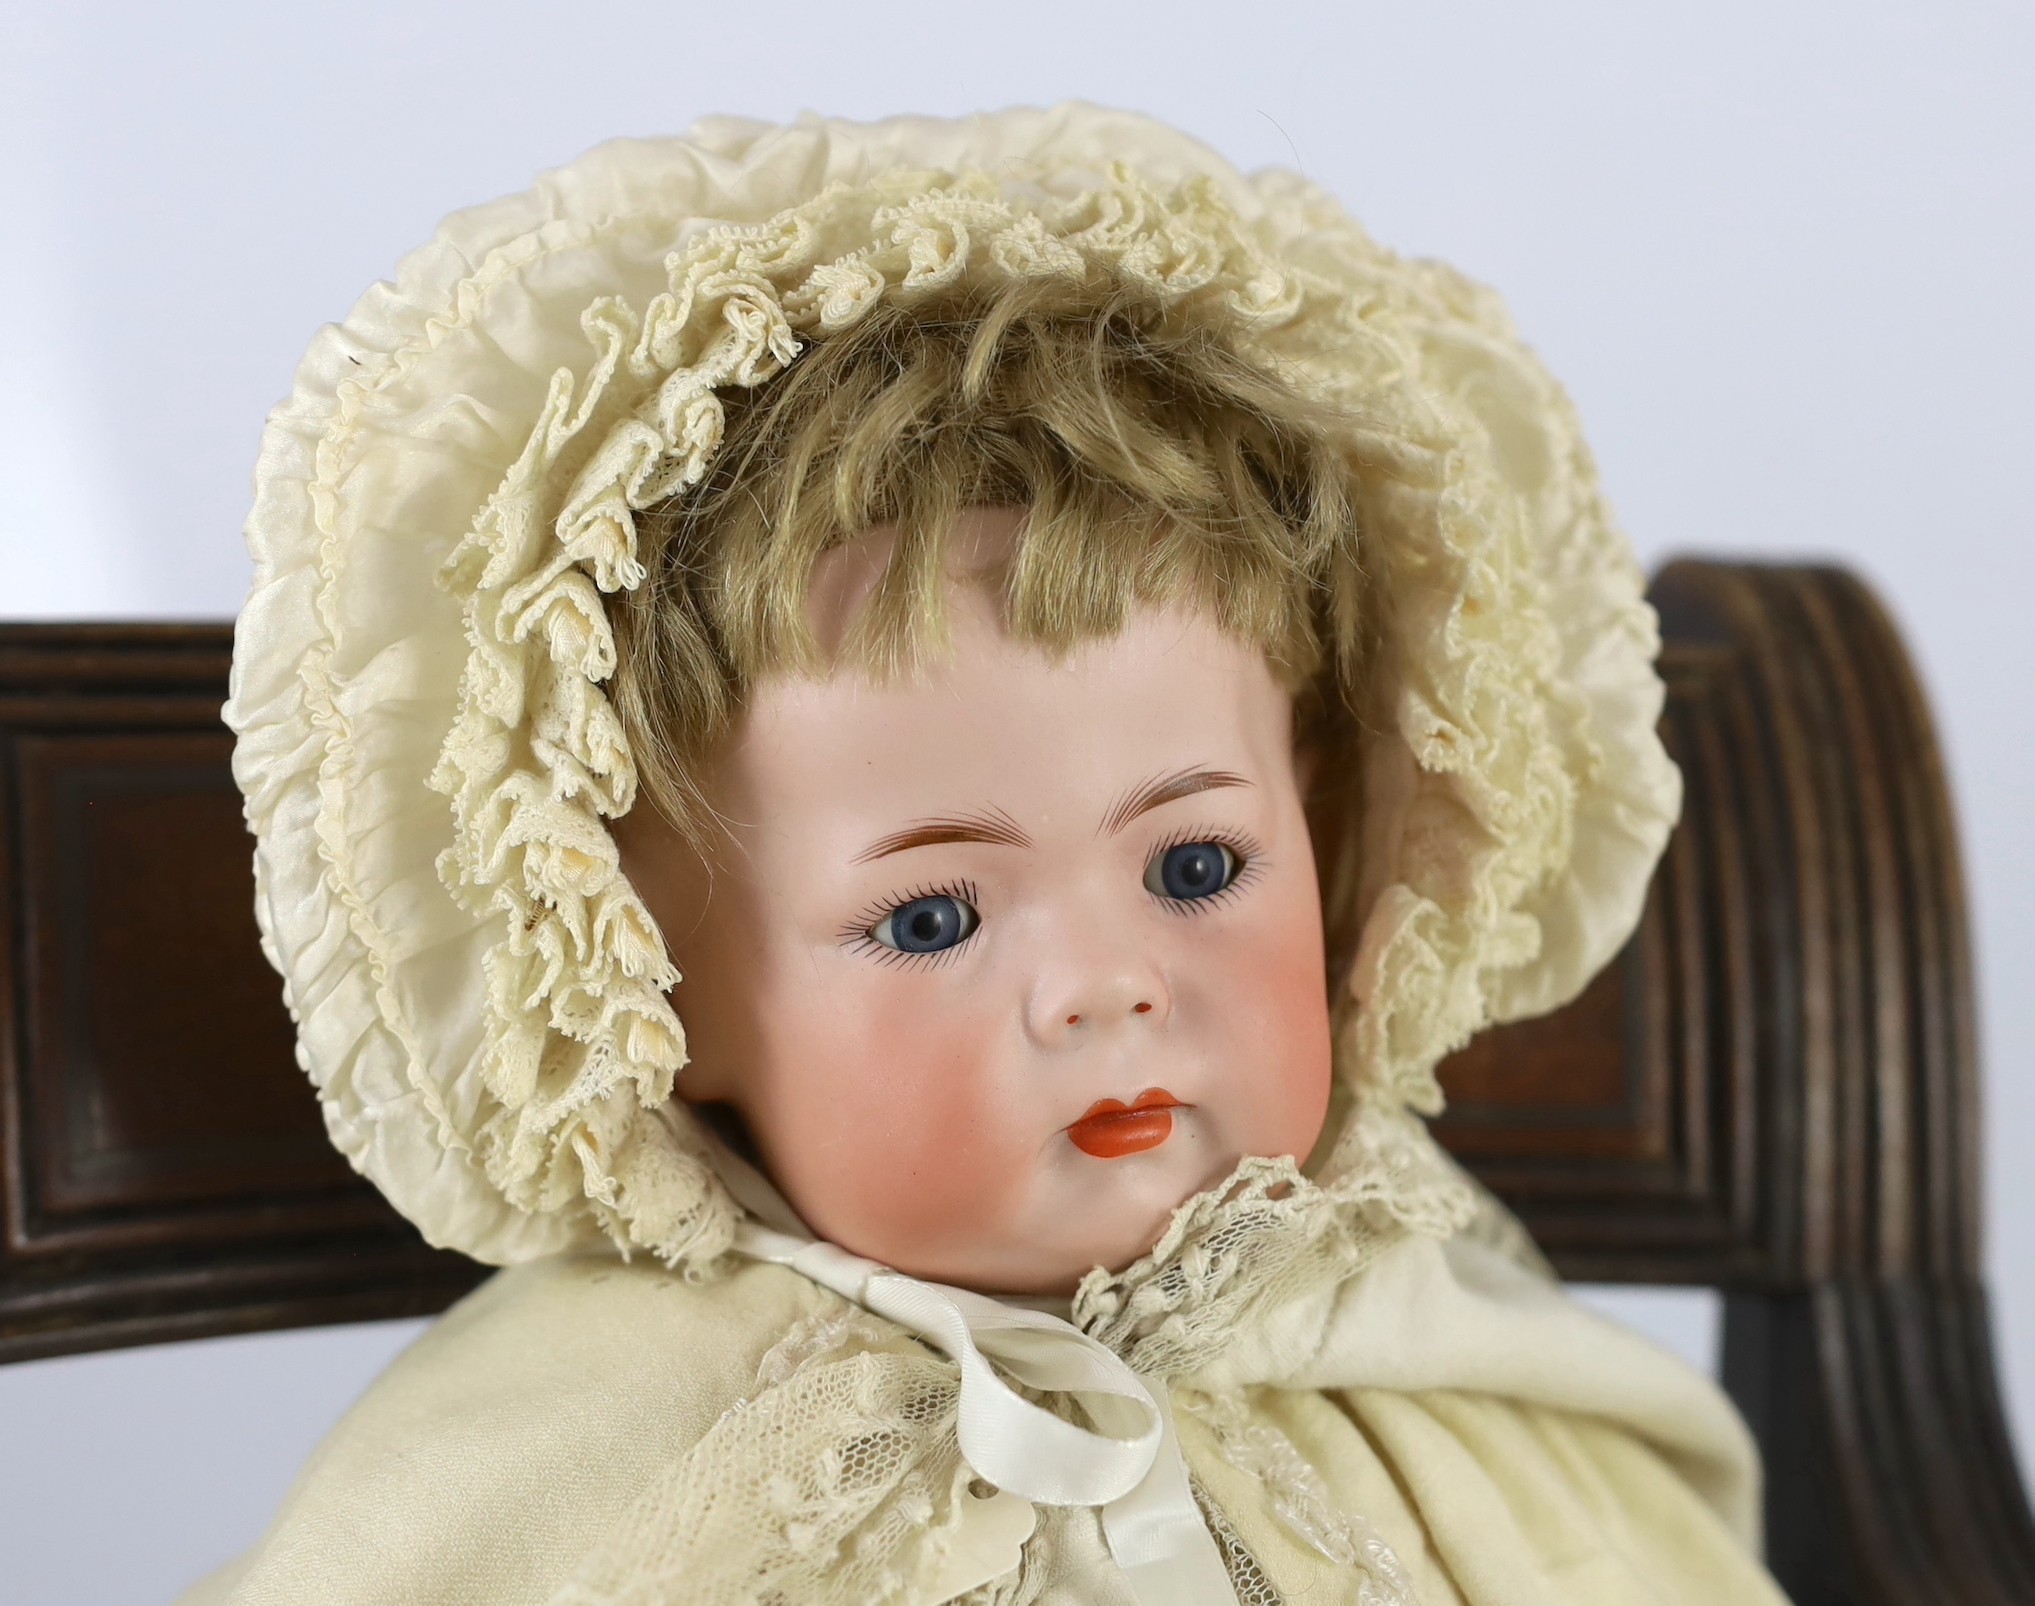 A Kammer & Reinhardt / Simon & Halbig bisque character doll, German, circa 1911, impressed 115/A 42, - Image 2 of 4